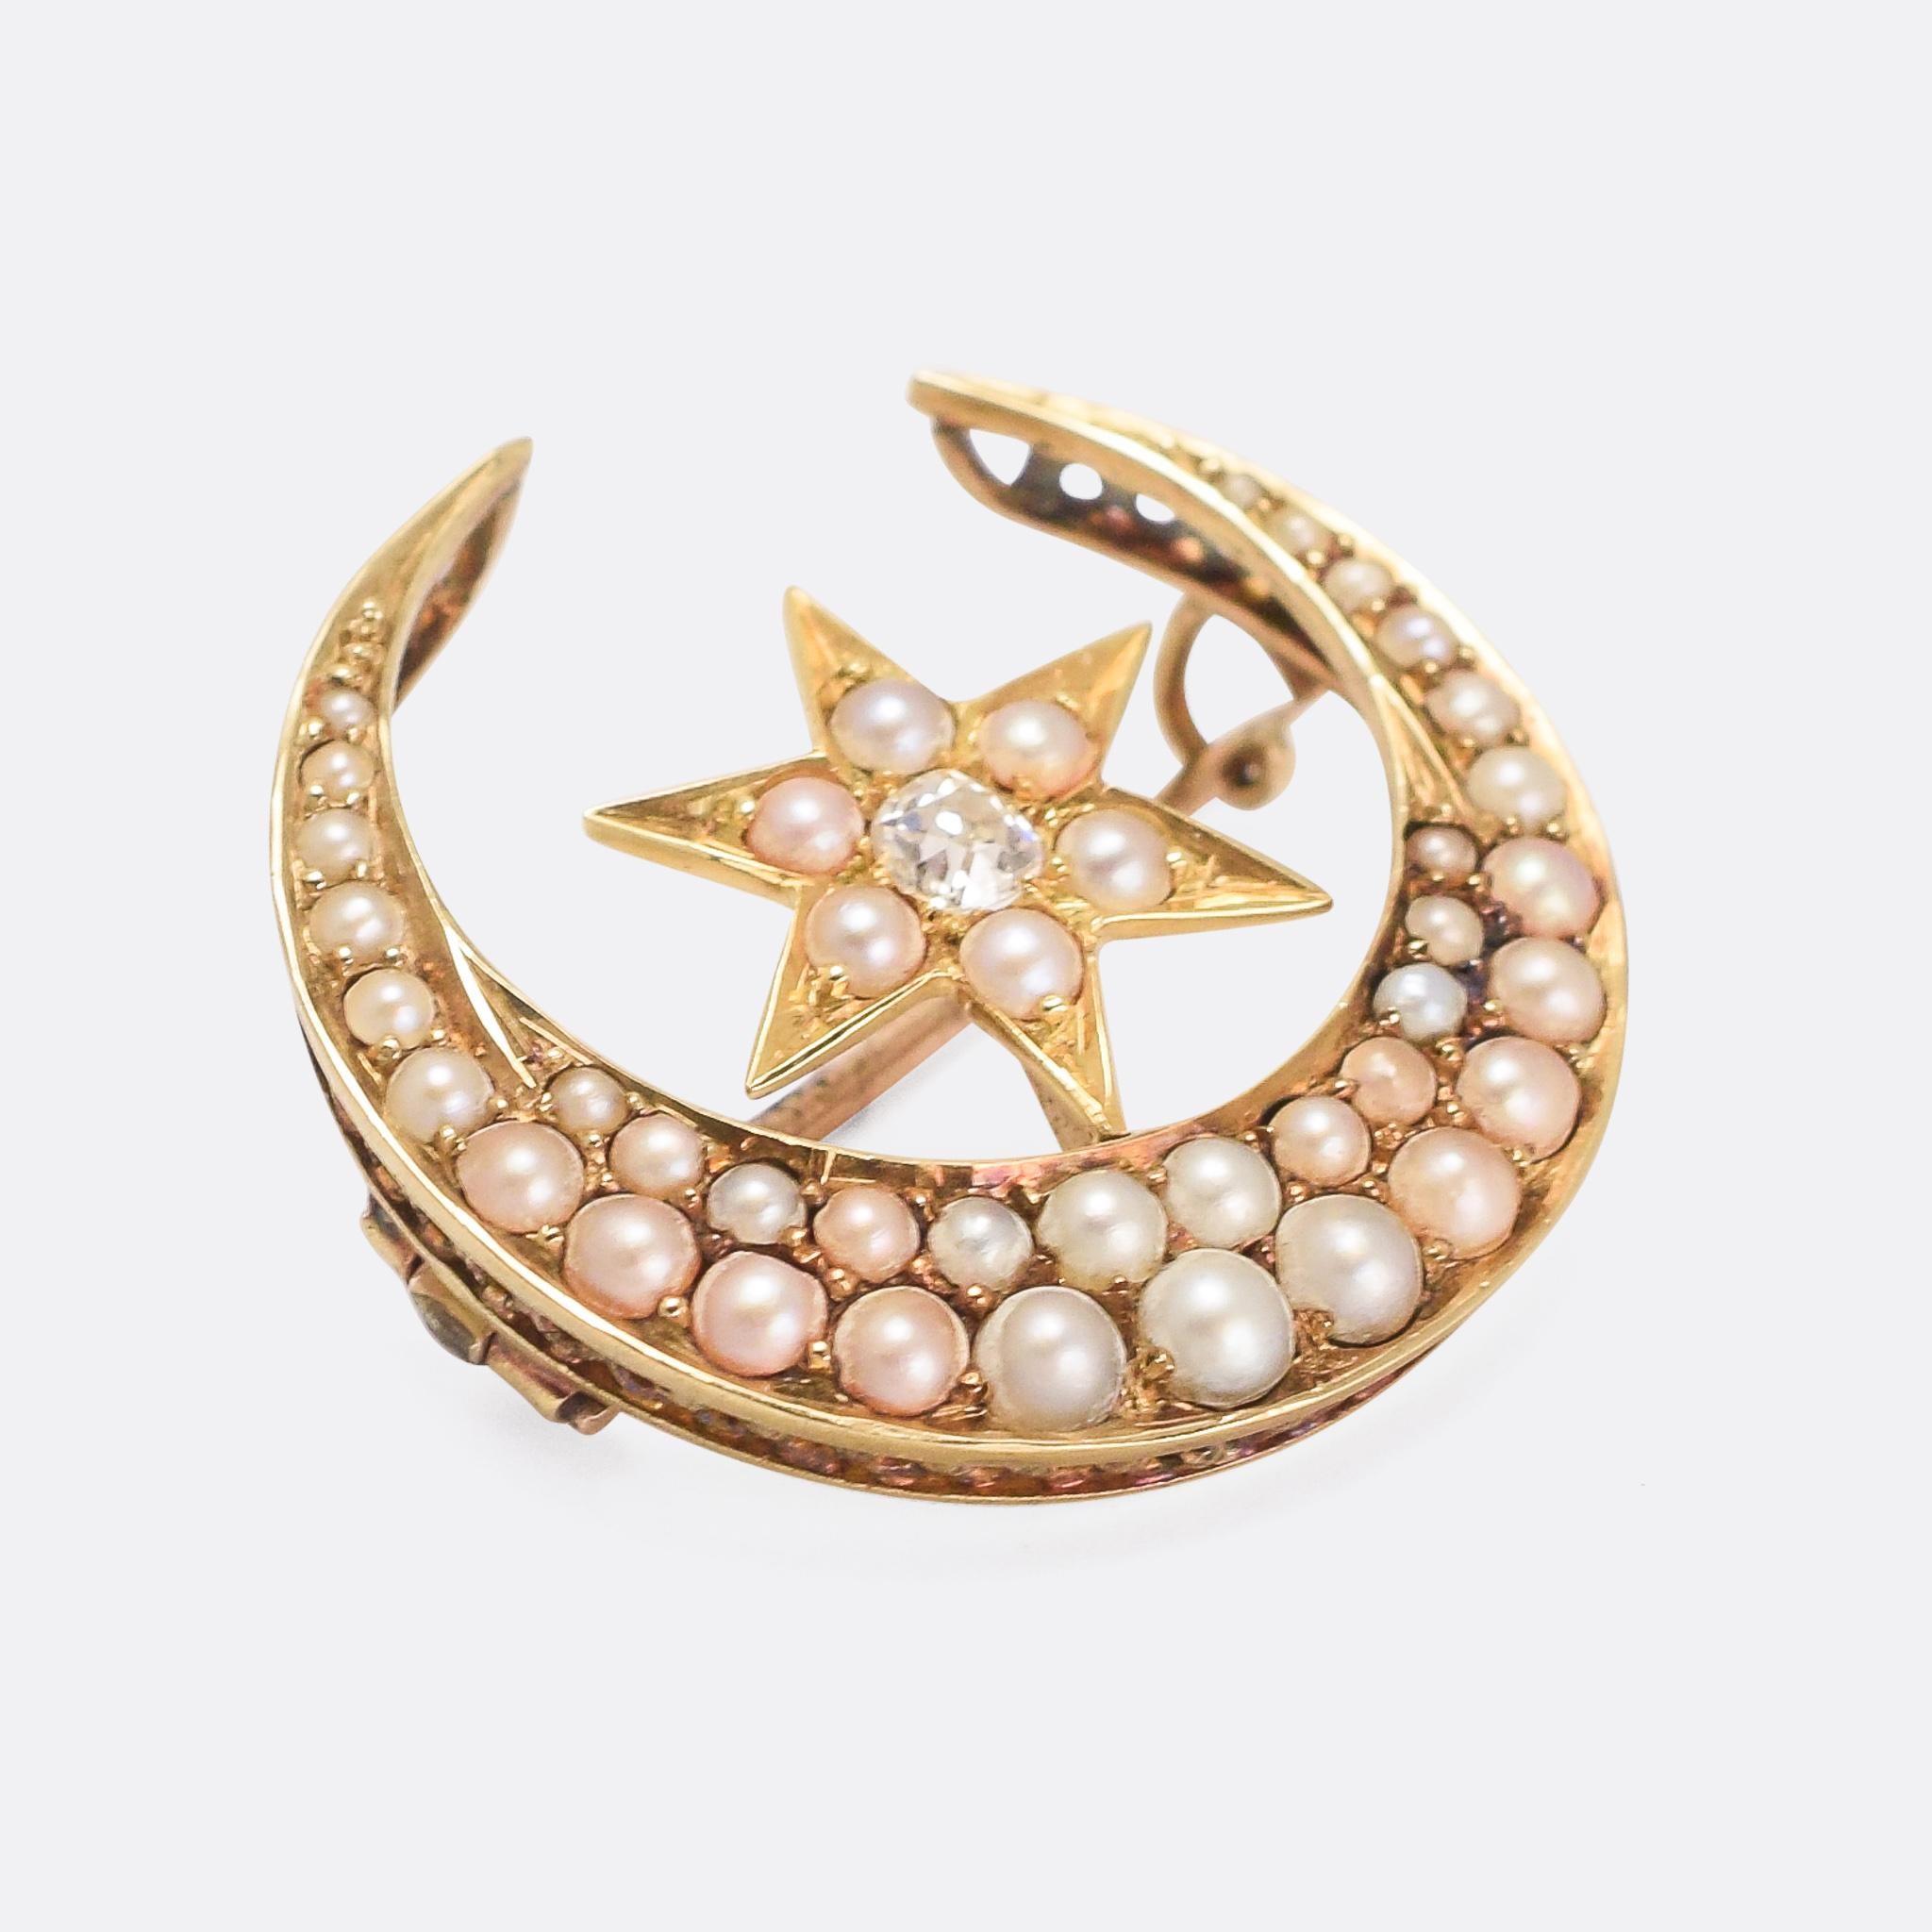 A cool Victorian Crescent Moon and Star brooch set with split pearls and an old mine cut diamond in the centre of the star. It dates from the latter half of the 19th Century, circa 1880.

STONES 
Natural pearls and .20ct old mine cut